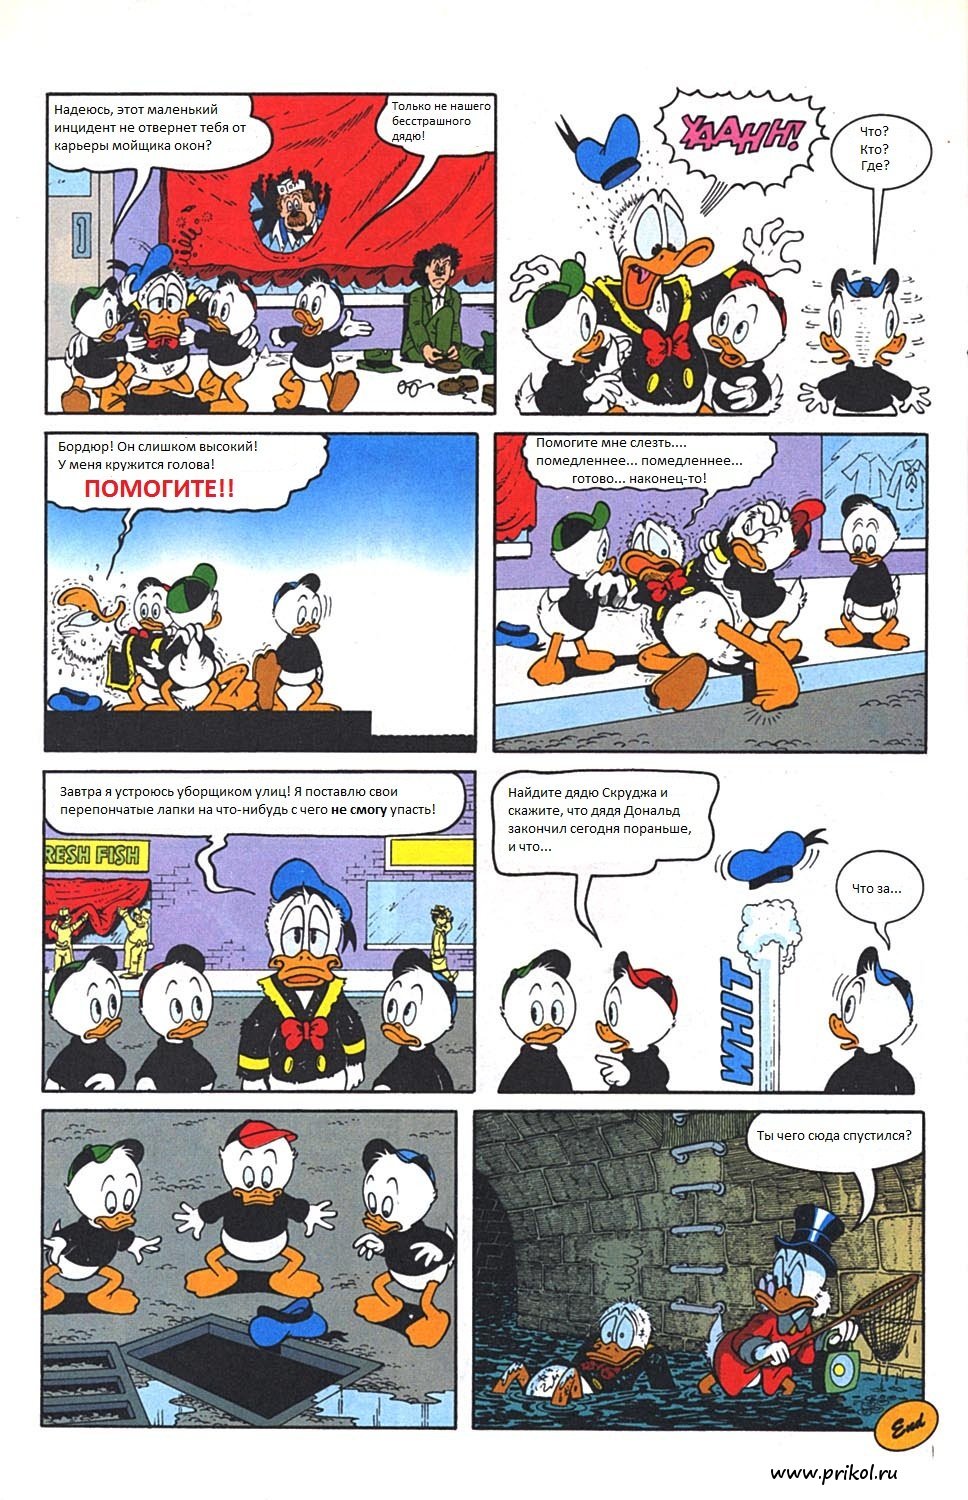 incident-at-mcduck-tower-10